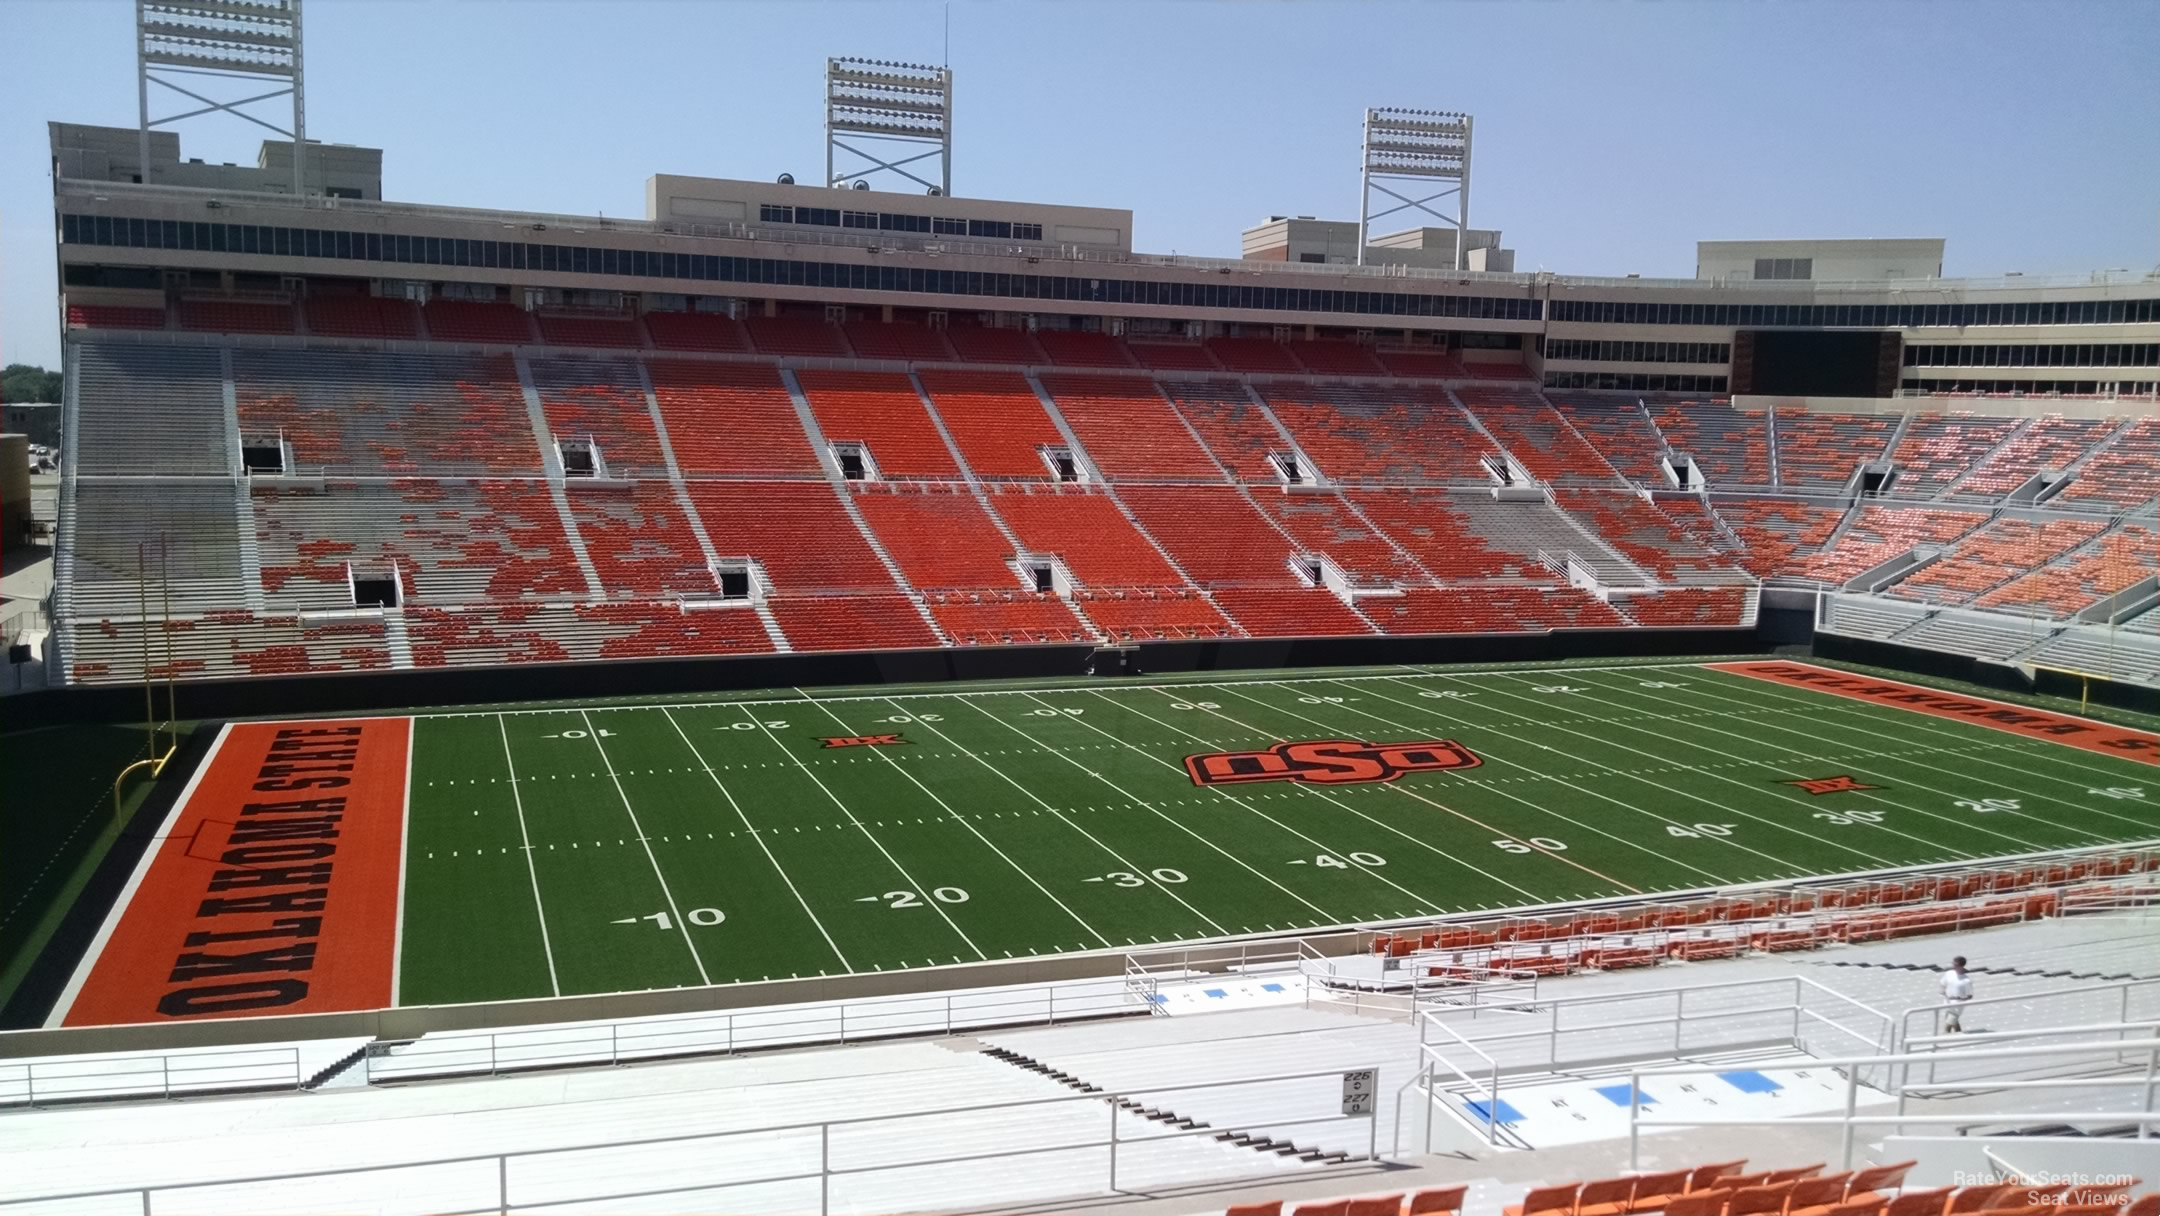 section 333a, row 19 seat view  - boone pickens stadium